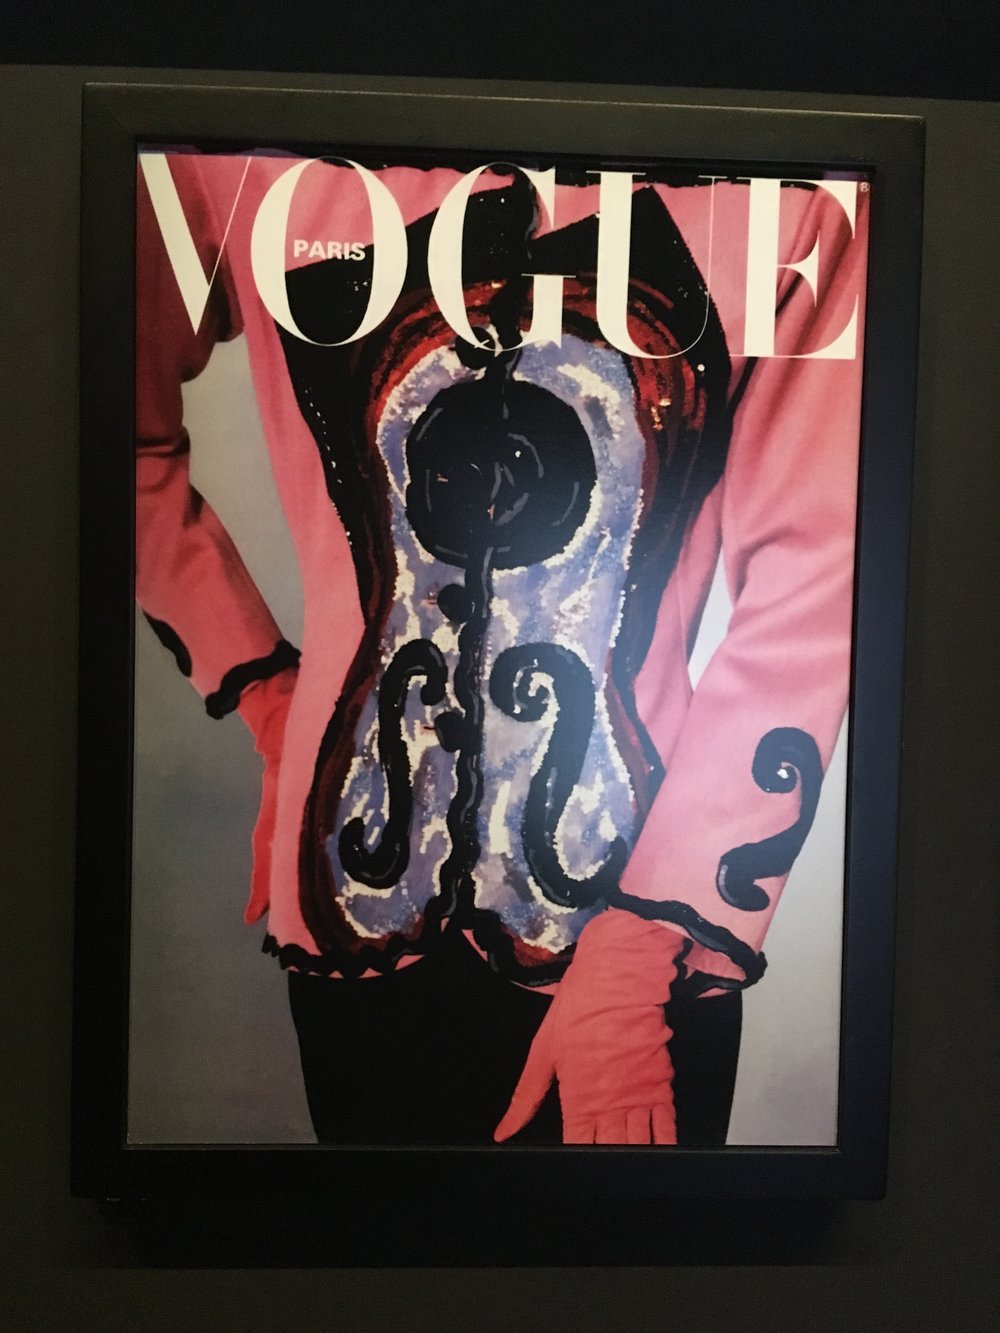  Michael Roberts' cover for  Vogue &nbsp;Paris, 1988, featuring YSL's cubist tribute to Picasso 